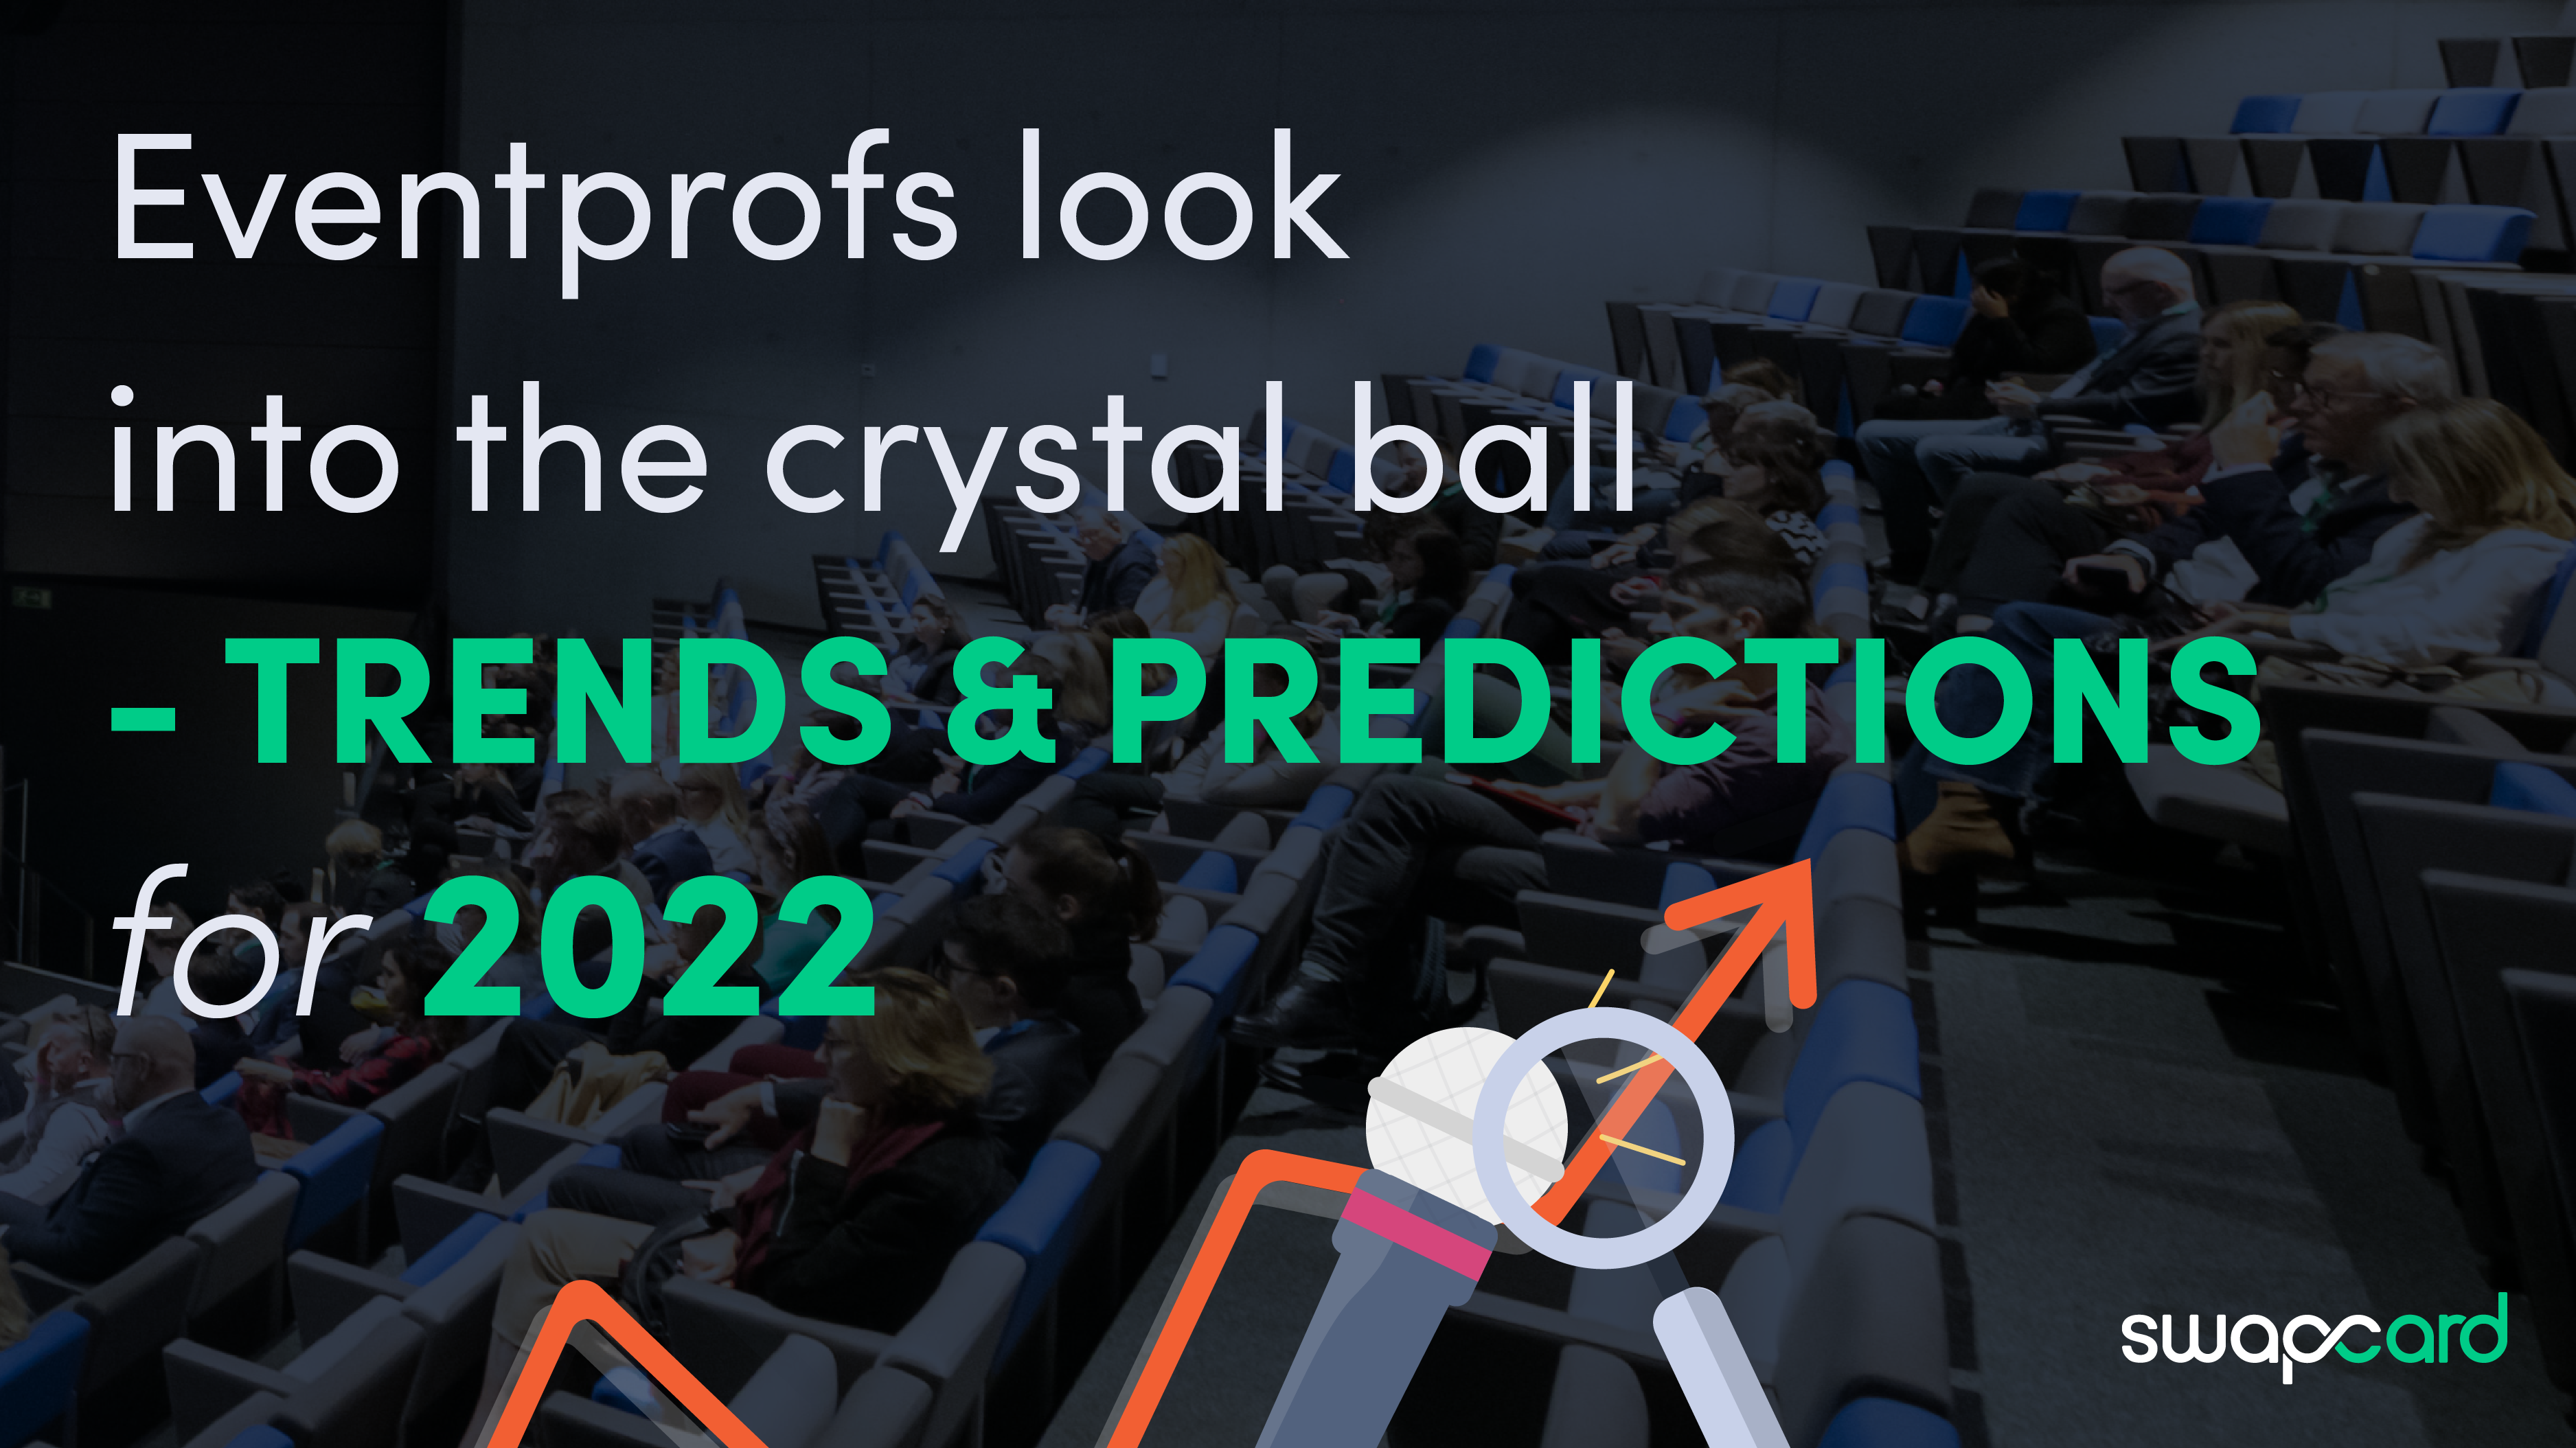 Eventprofs look into the crystal ball - trends & predictions for 2022